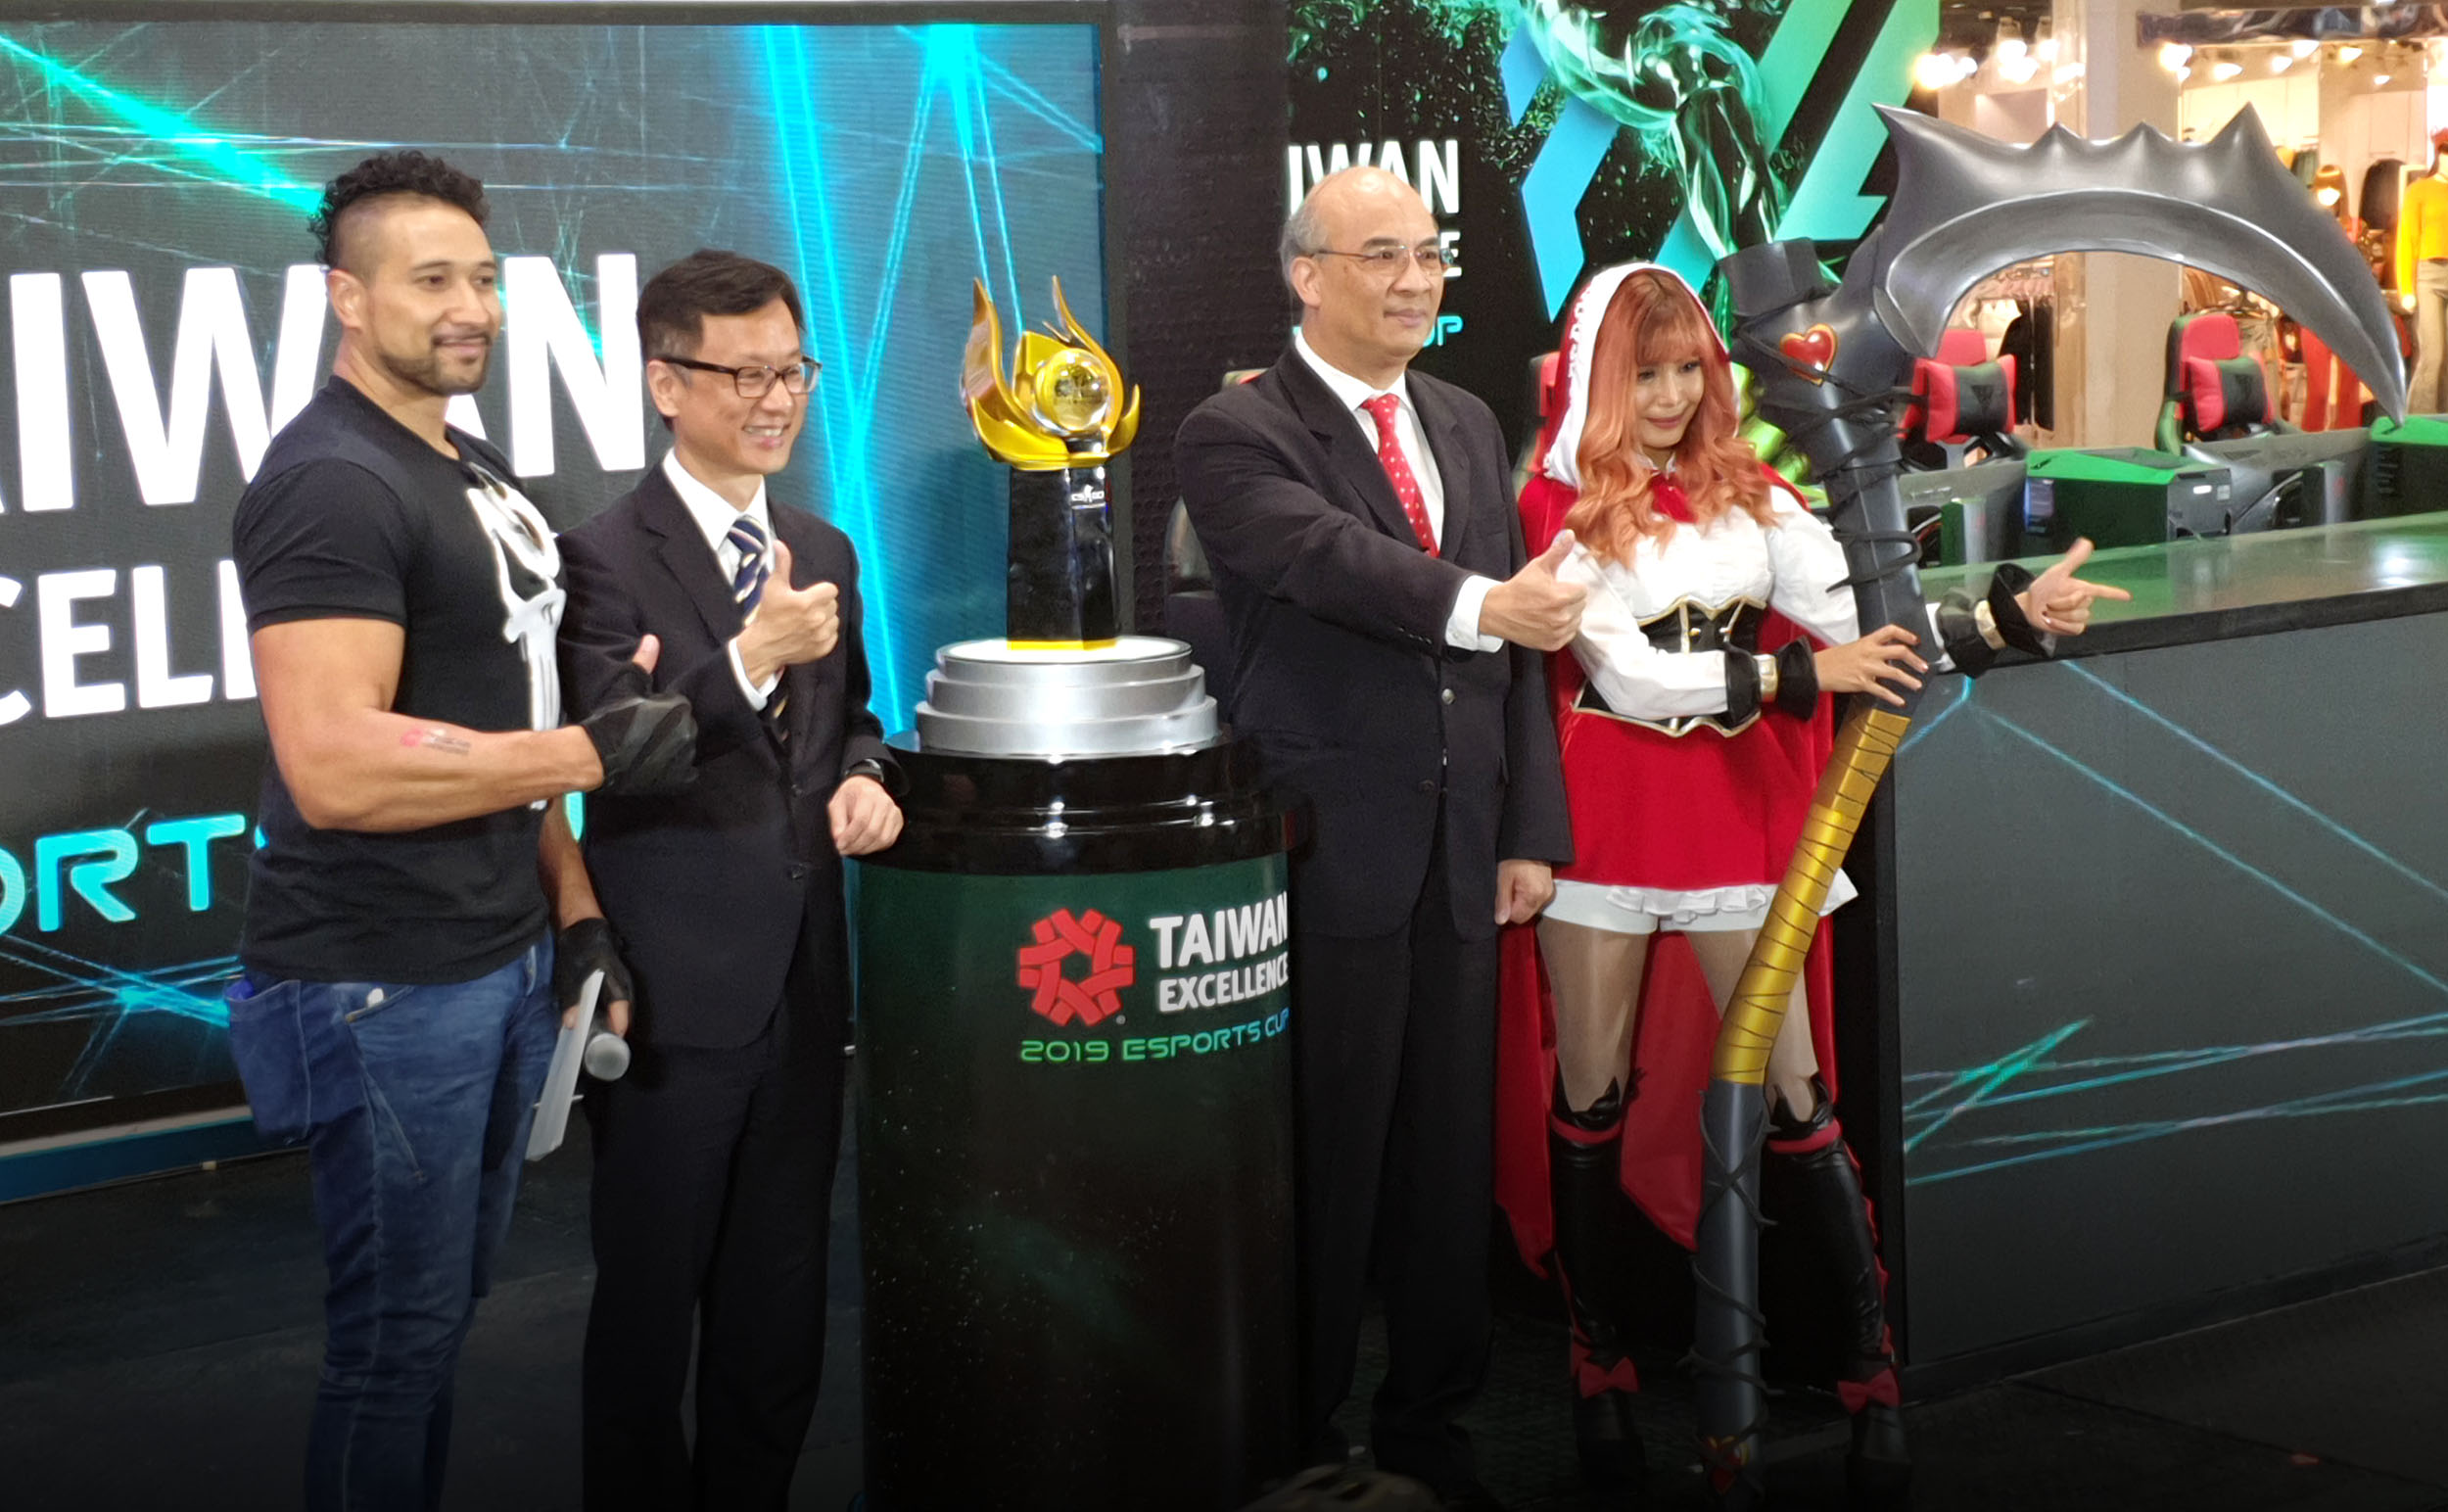 2019 Taiwan Excellence eSports Cup features gaming products and elevate talent of Pinoy eSports players